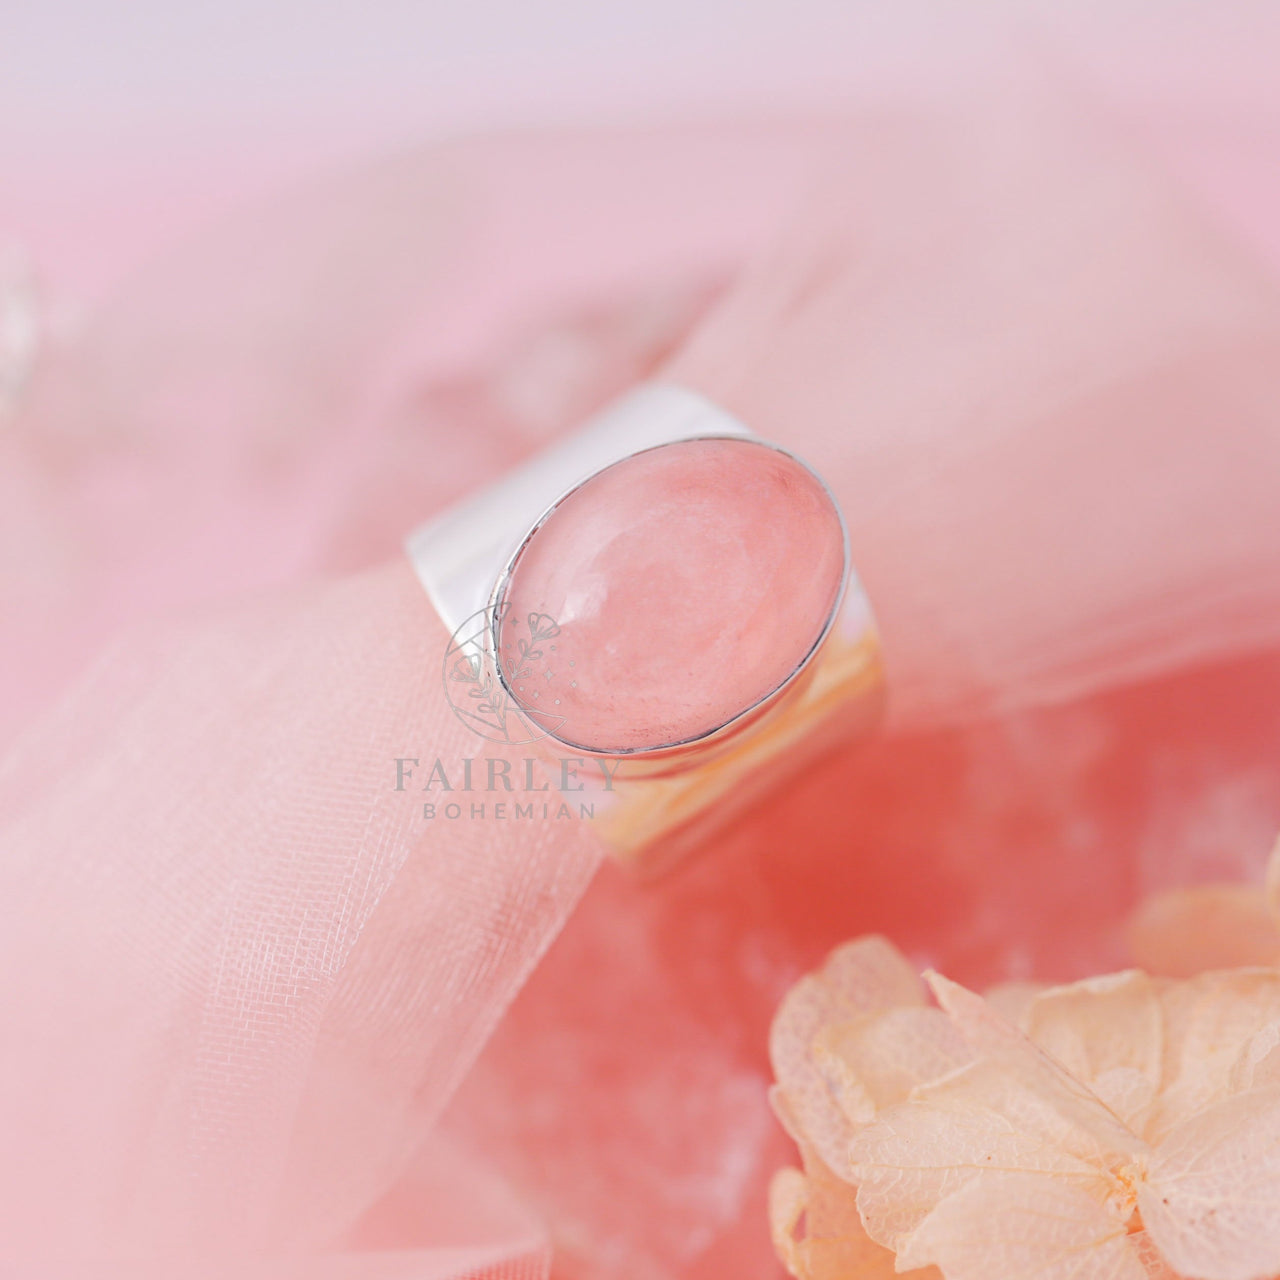 rose quartz october birthstone statement ring solid silver large stone thick band romantic flowers